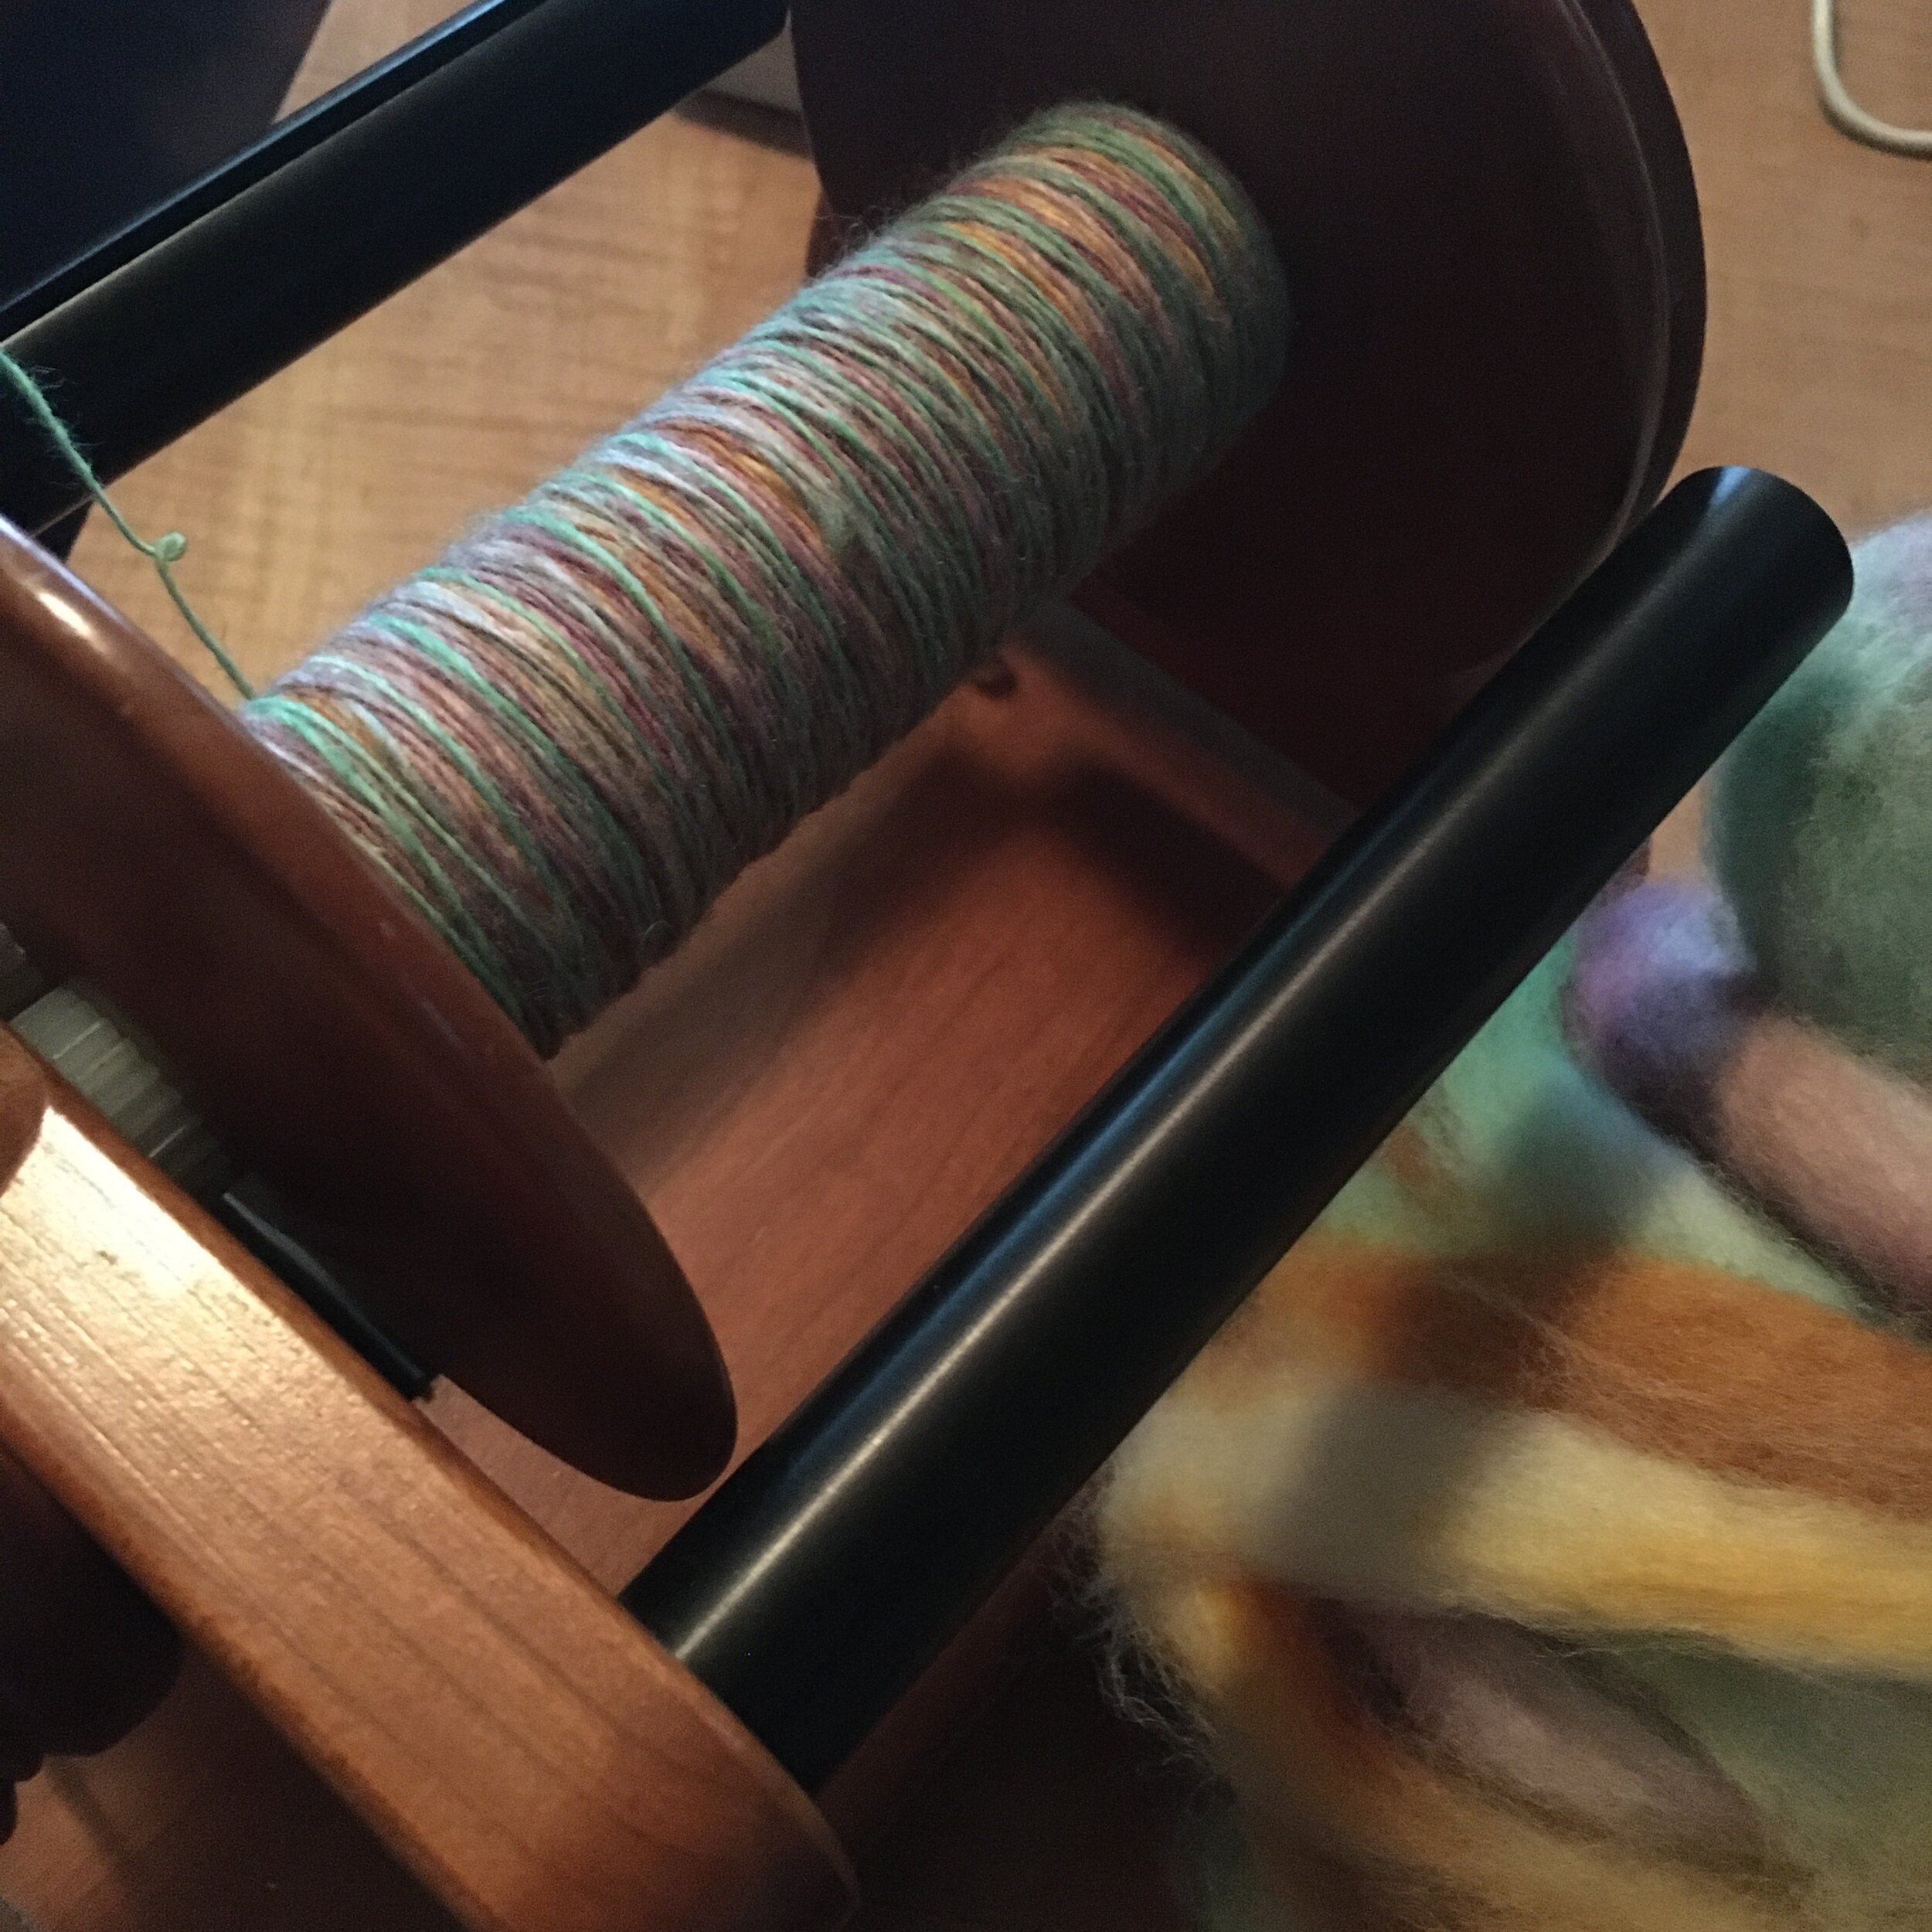 Photo of multicolored singles in progress, with fiber in background